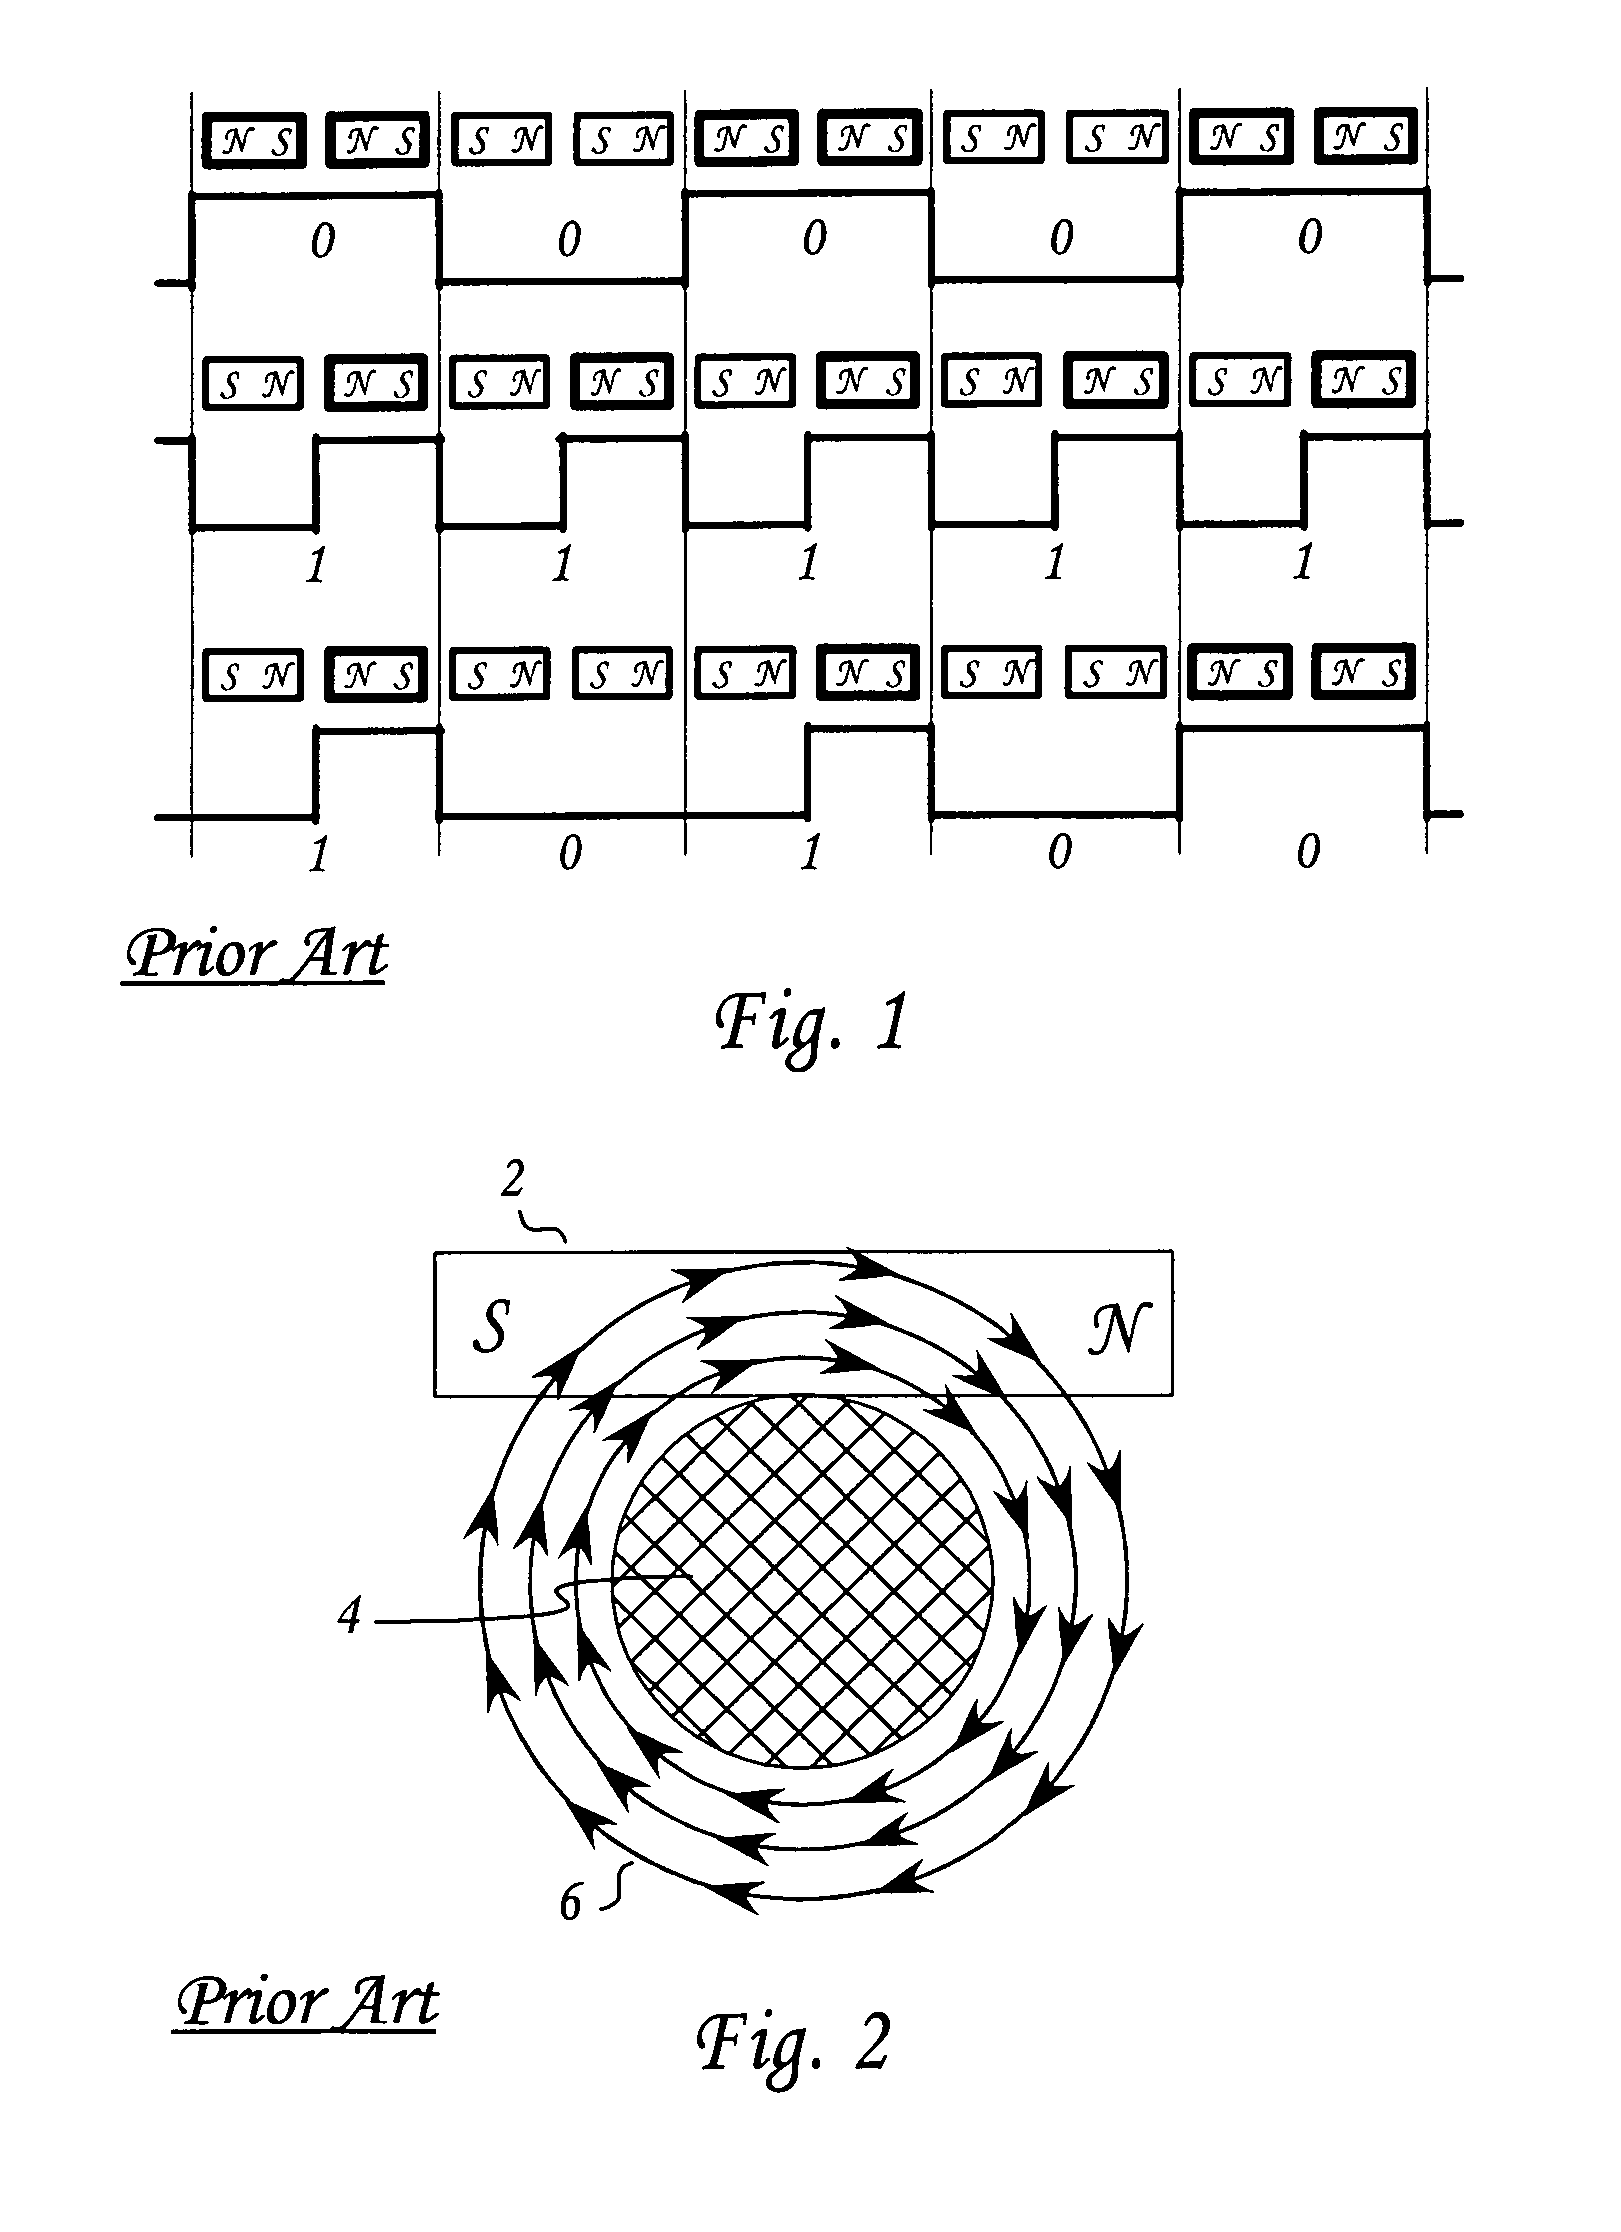 Method and system for a static magnetic read/write head